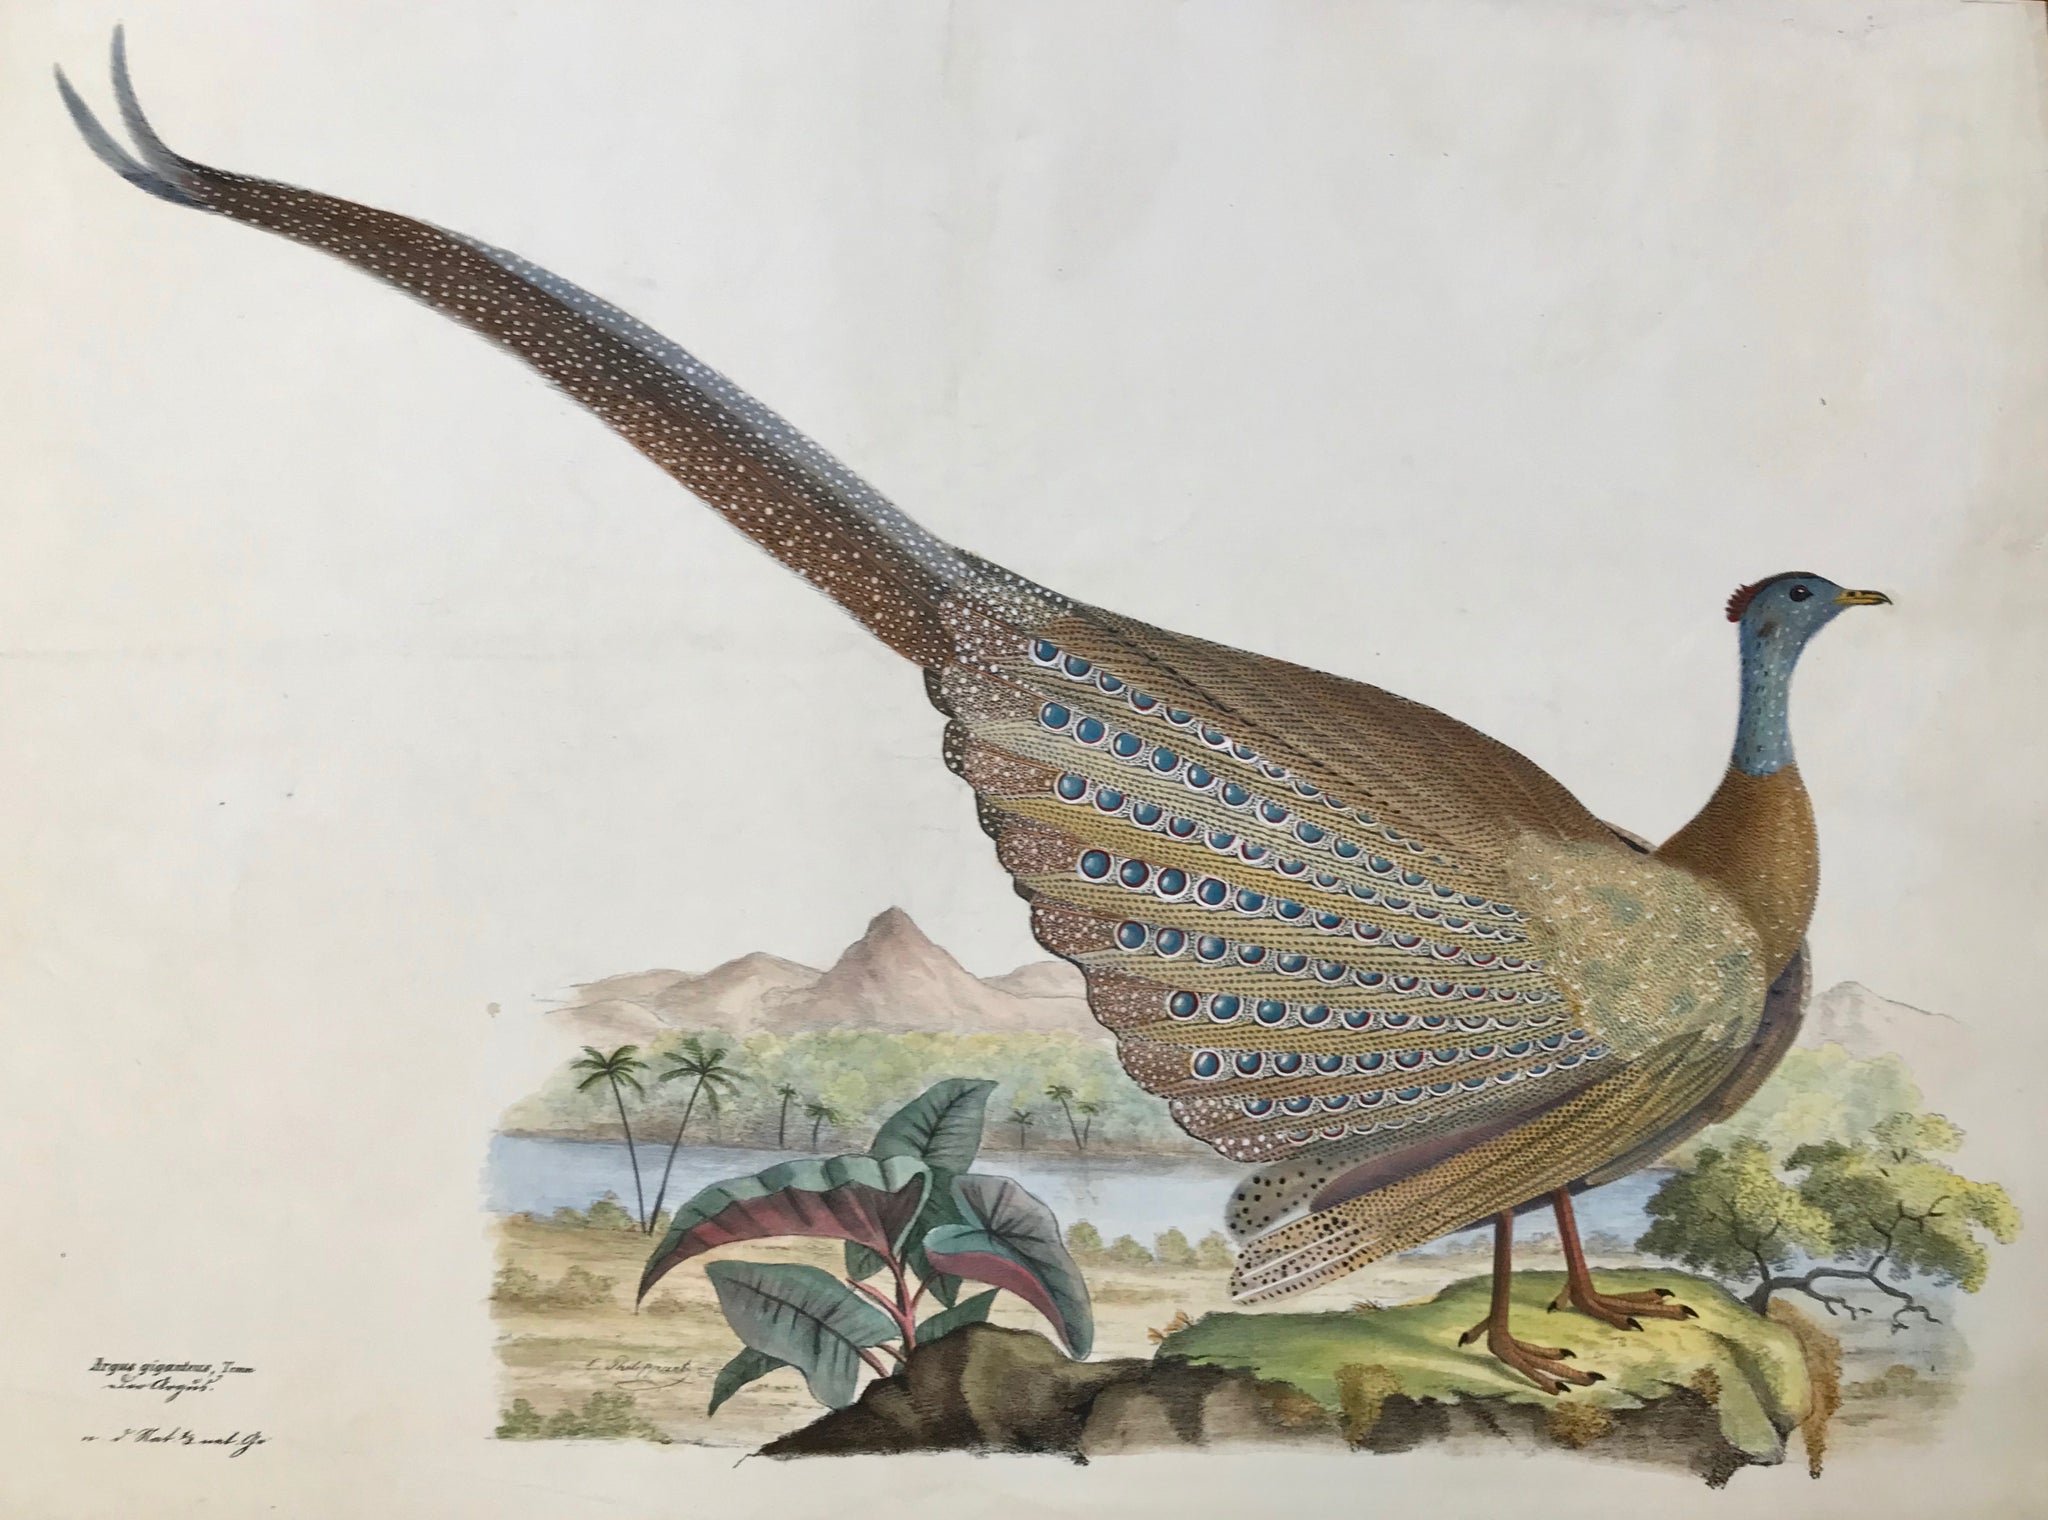    Goldfuss Animal and Insect Prints  Argus Giganteus - der Argus  Great Argus Pheasant  1 / 3 natural size, Goldfuss, interior design, wall decoration, ideas, idea, gift ideas, present, vintage, charming, special, decoration, home interior, living room design